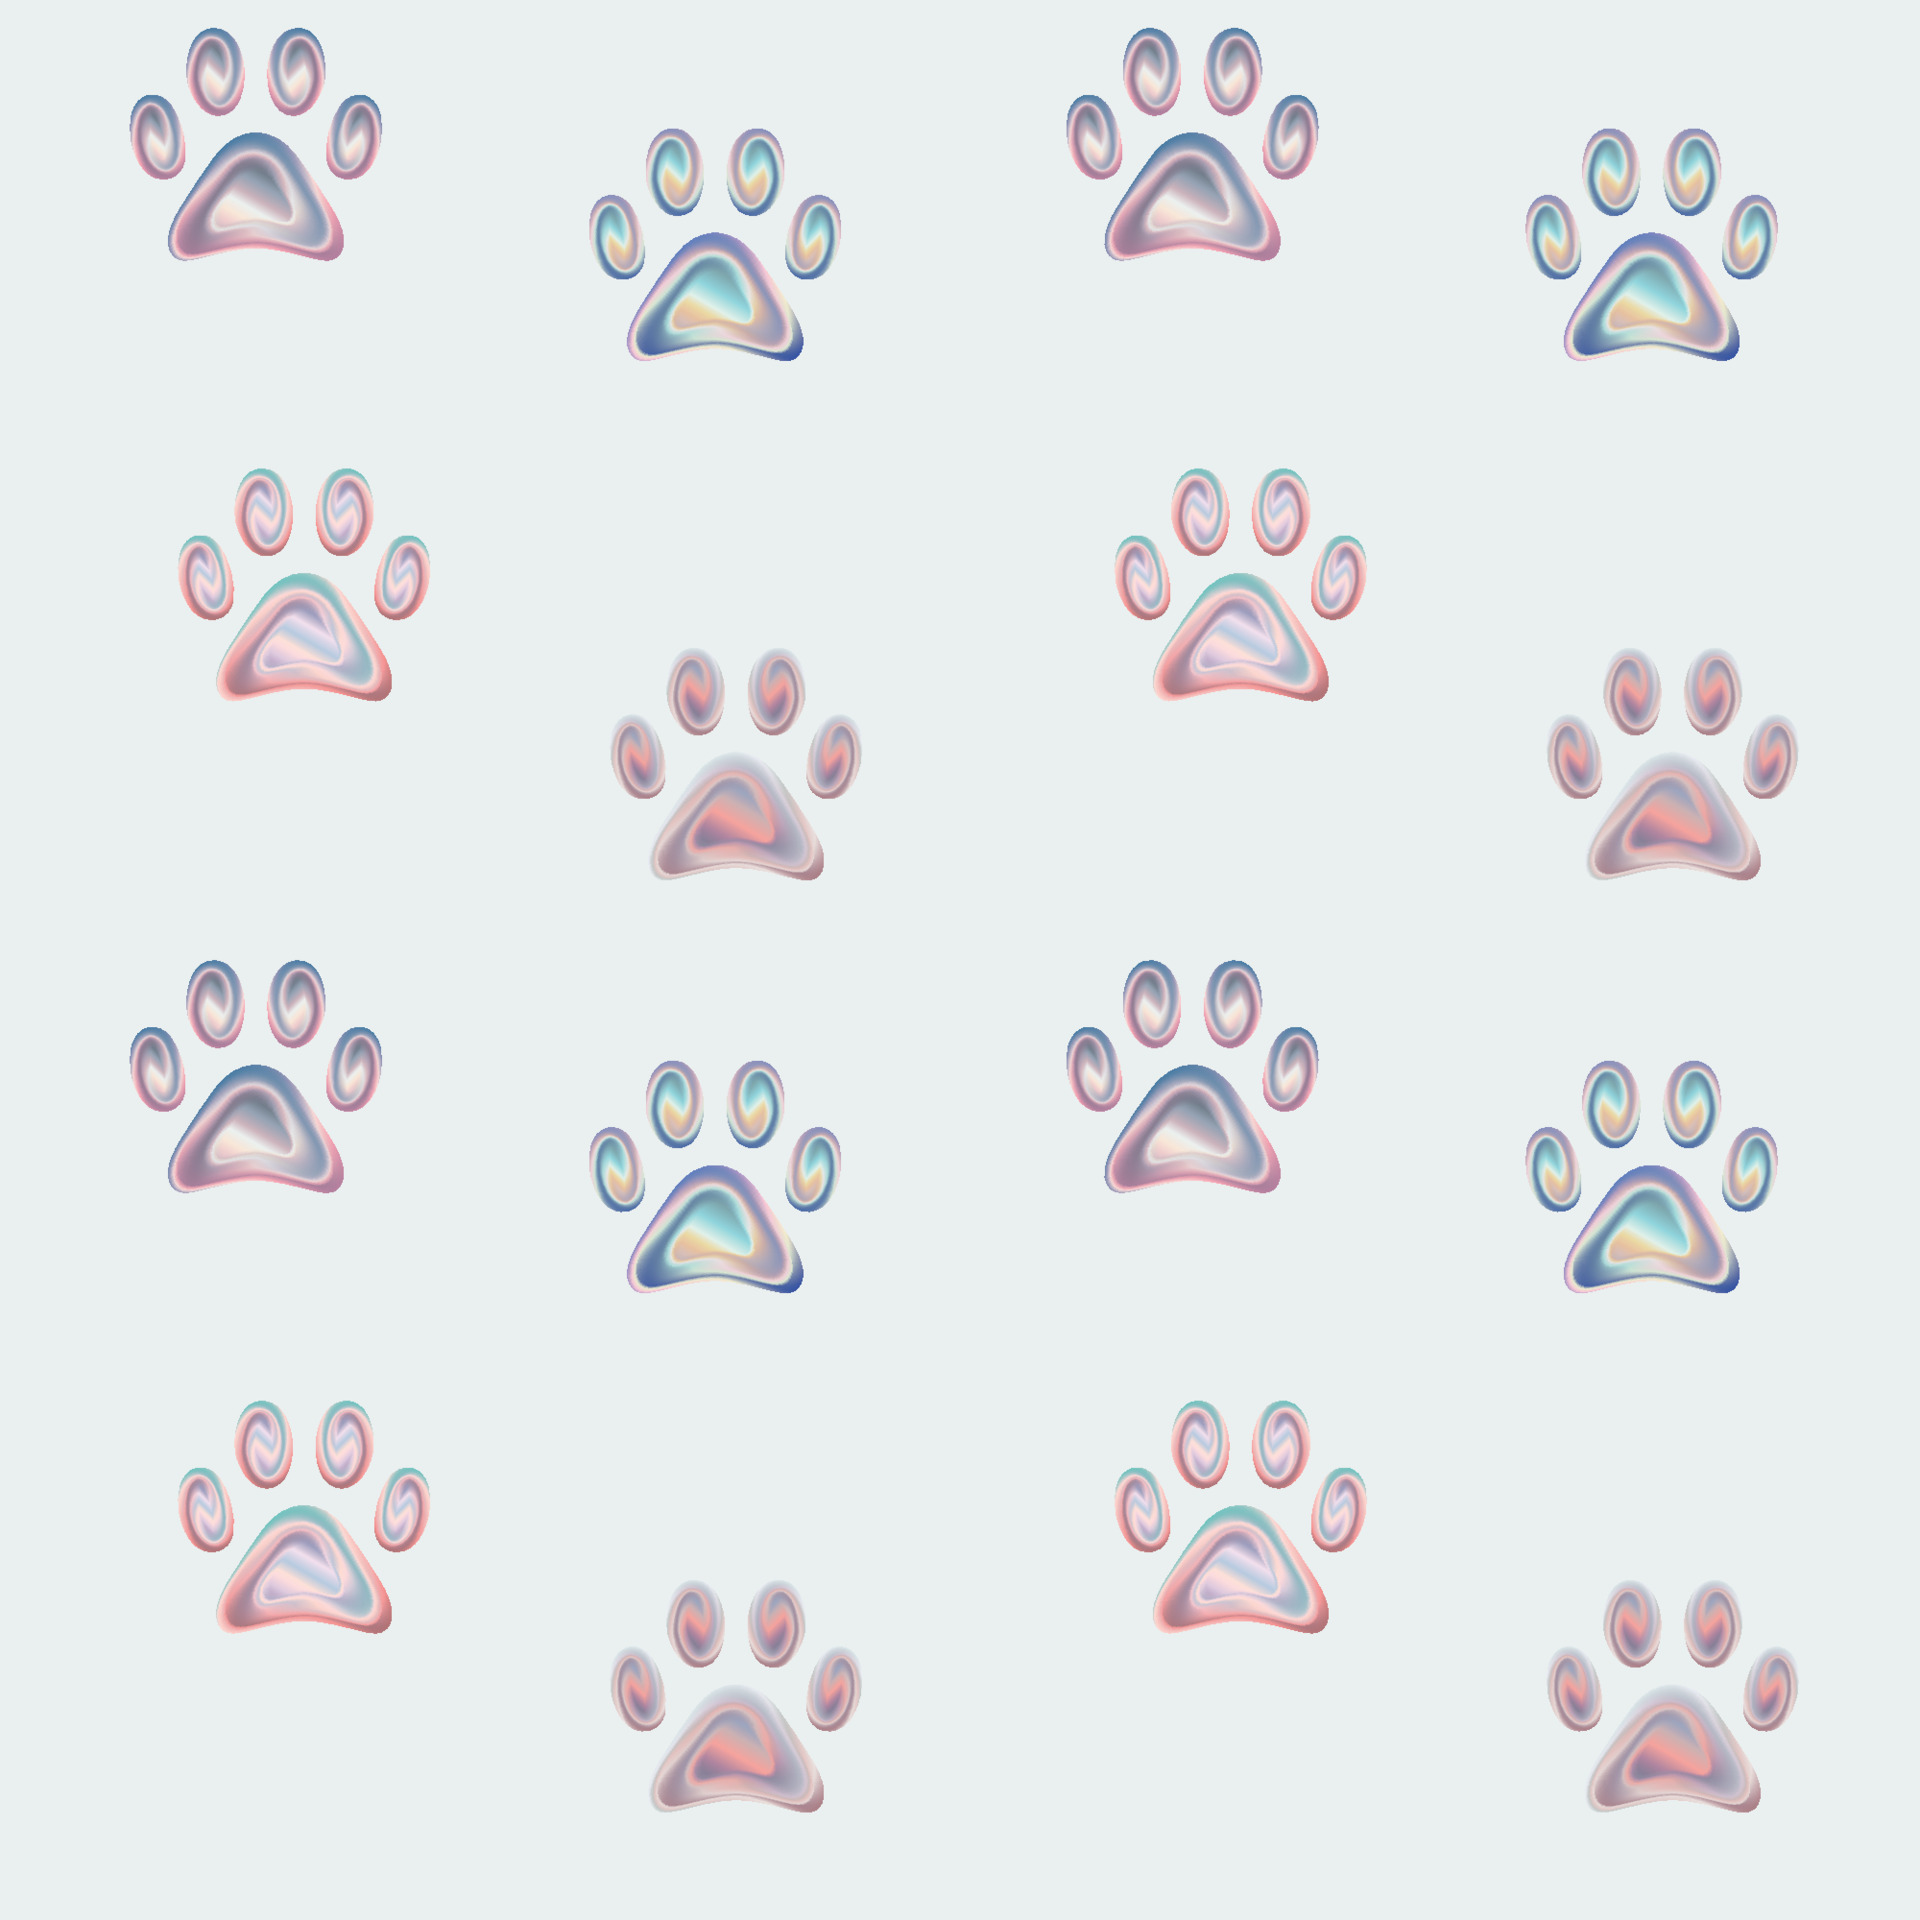 Gay paw print phone wallpaper by TheWolfKing142 on DeviantArt